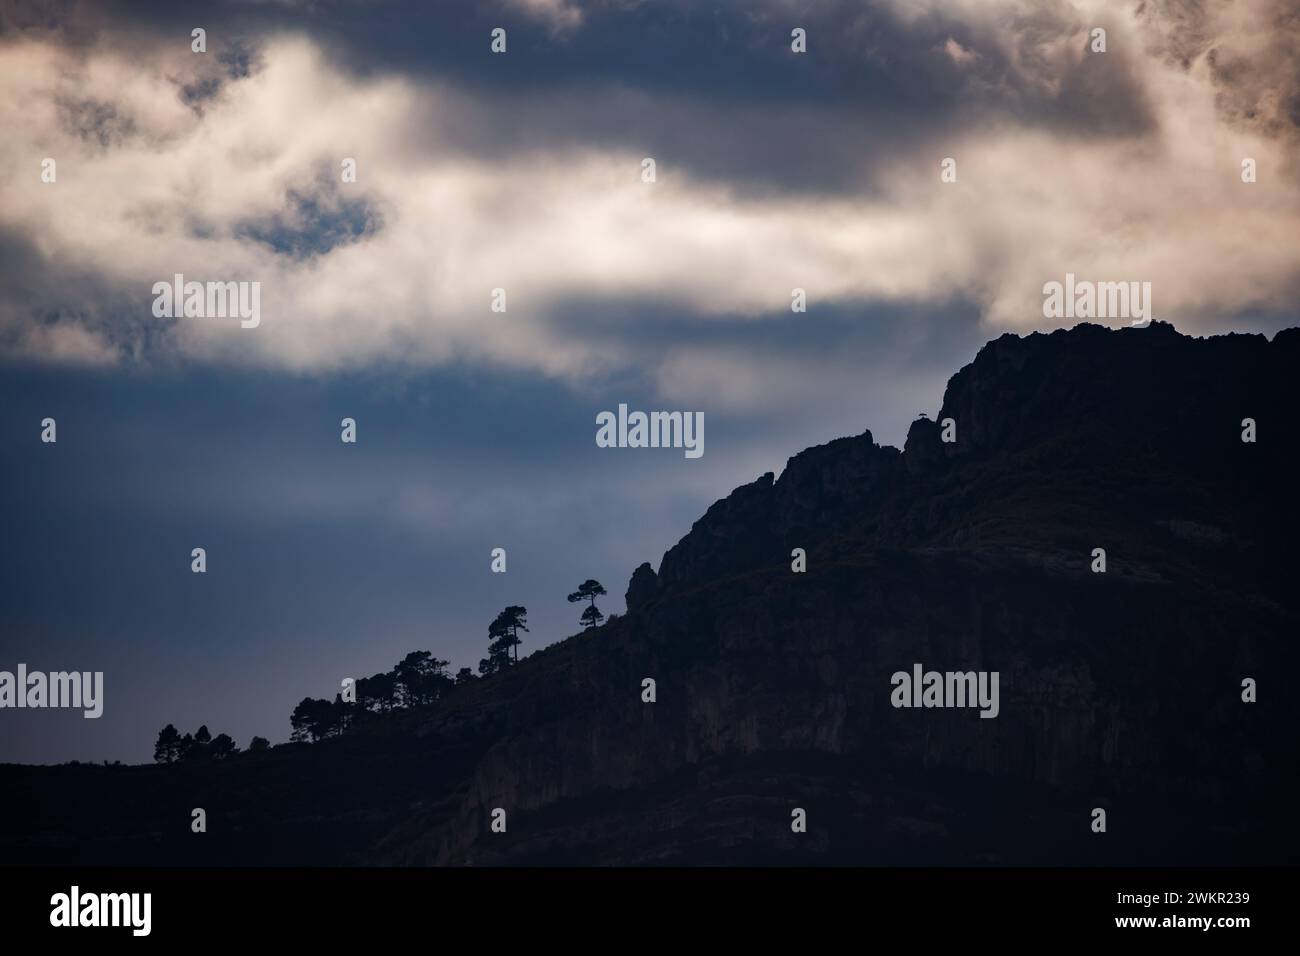 Pines silhouetted under iridescent clouds in Xeraco Stock Photo